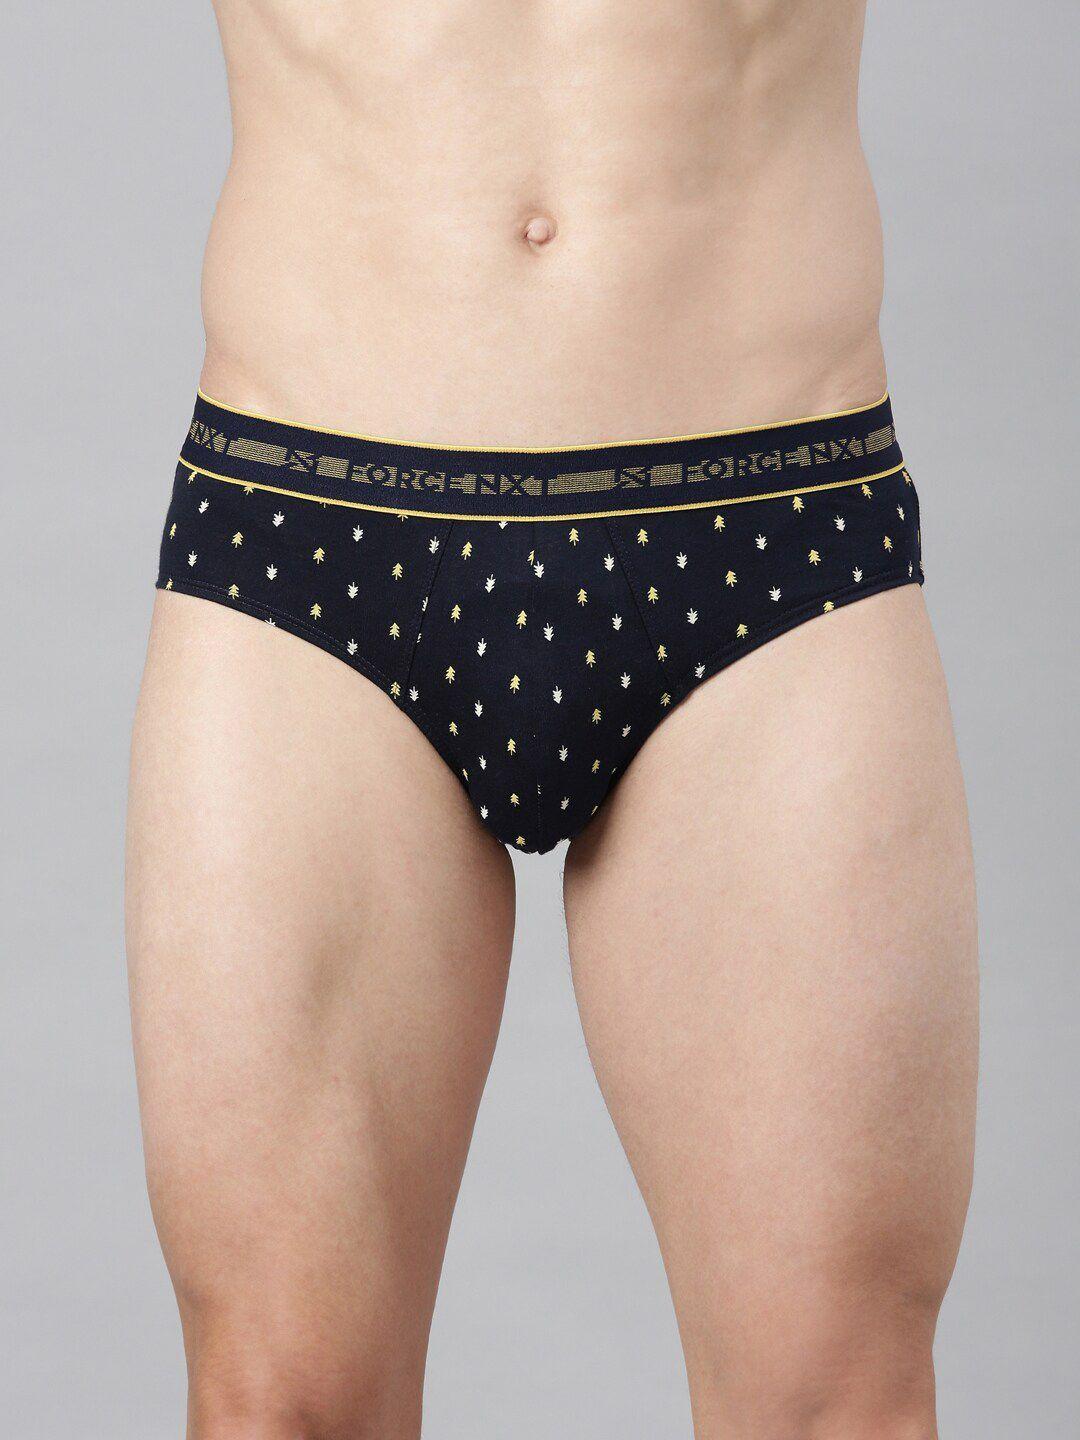 force-nxt-men-navy-blue-&-white-printed-pure-combed-cotton-basic-briefs